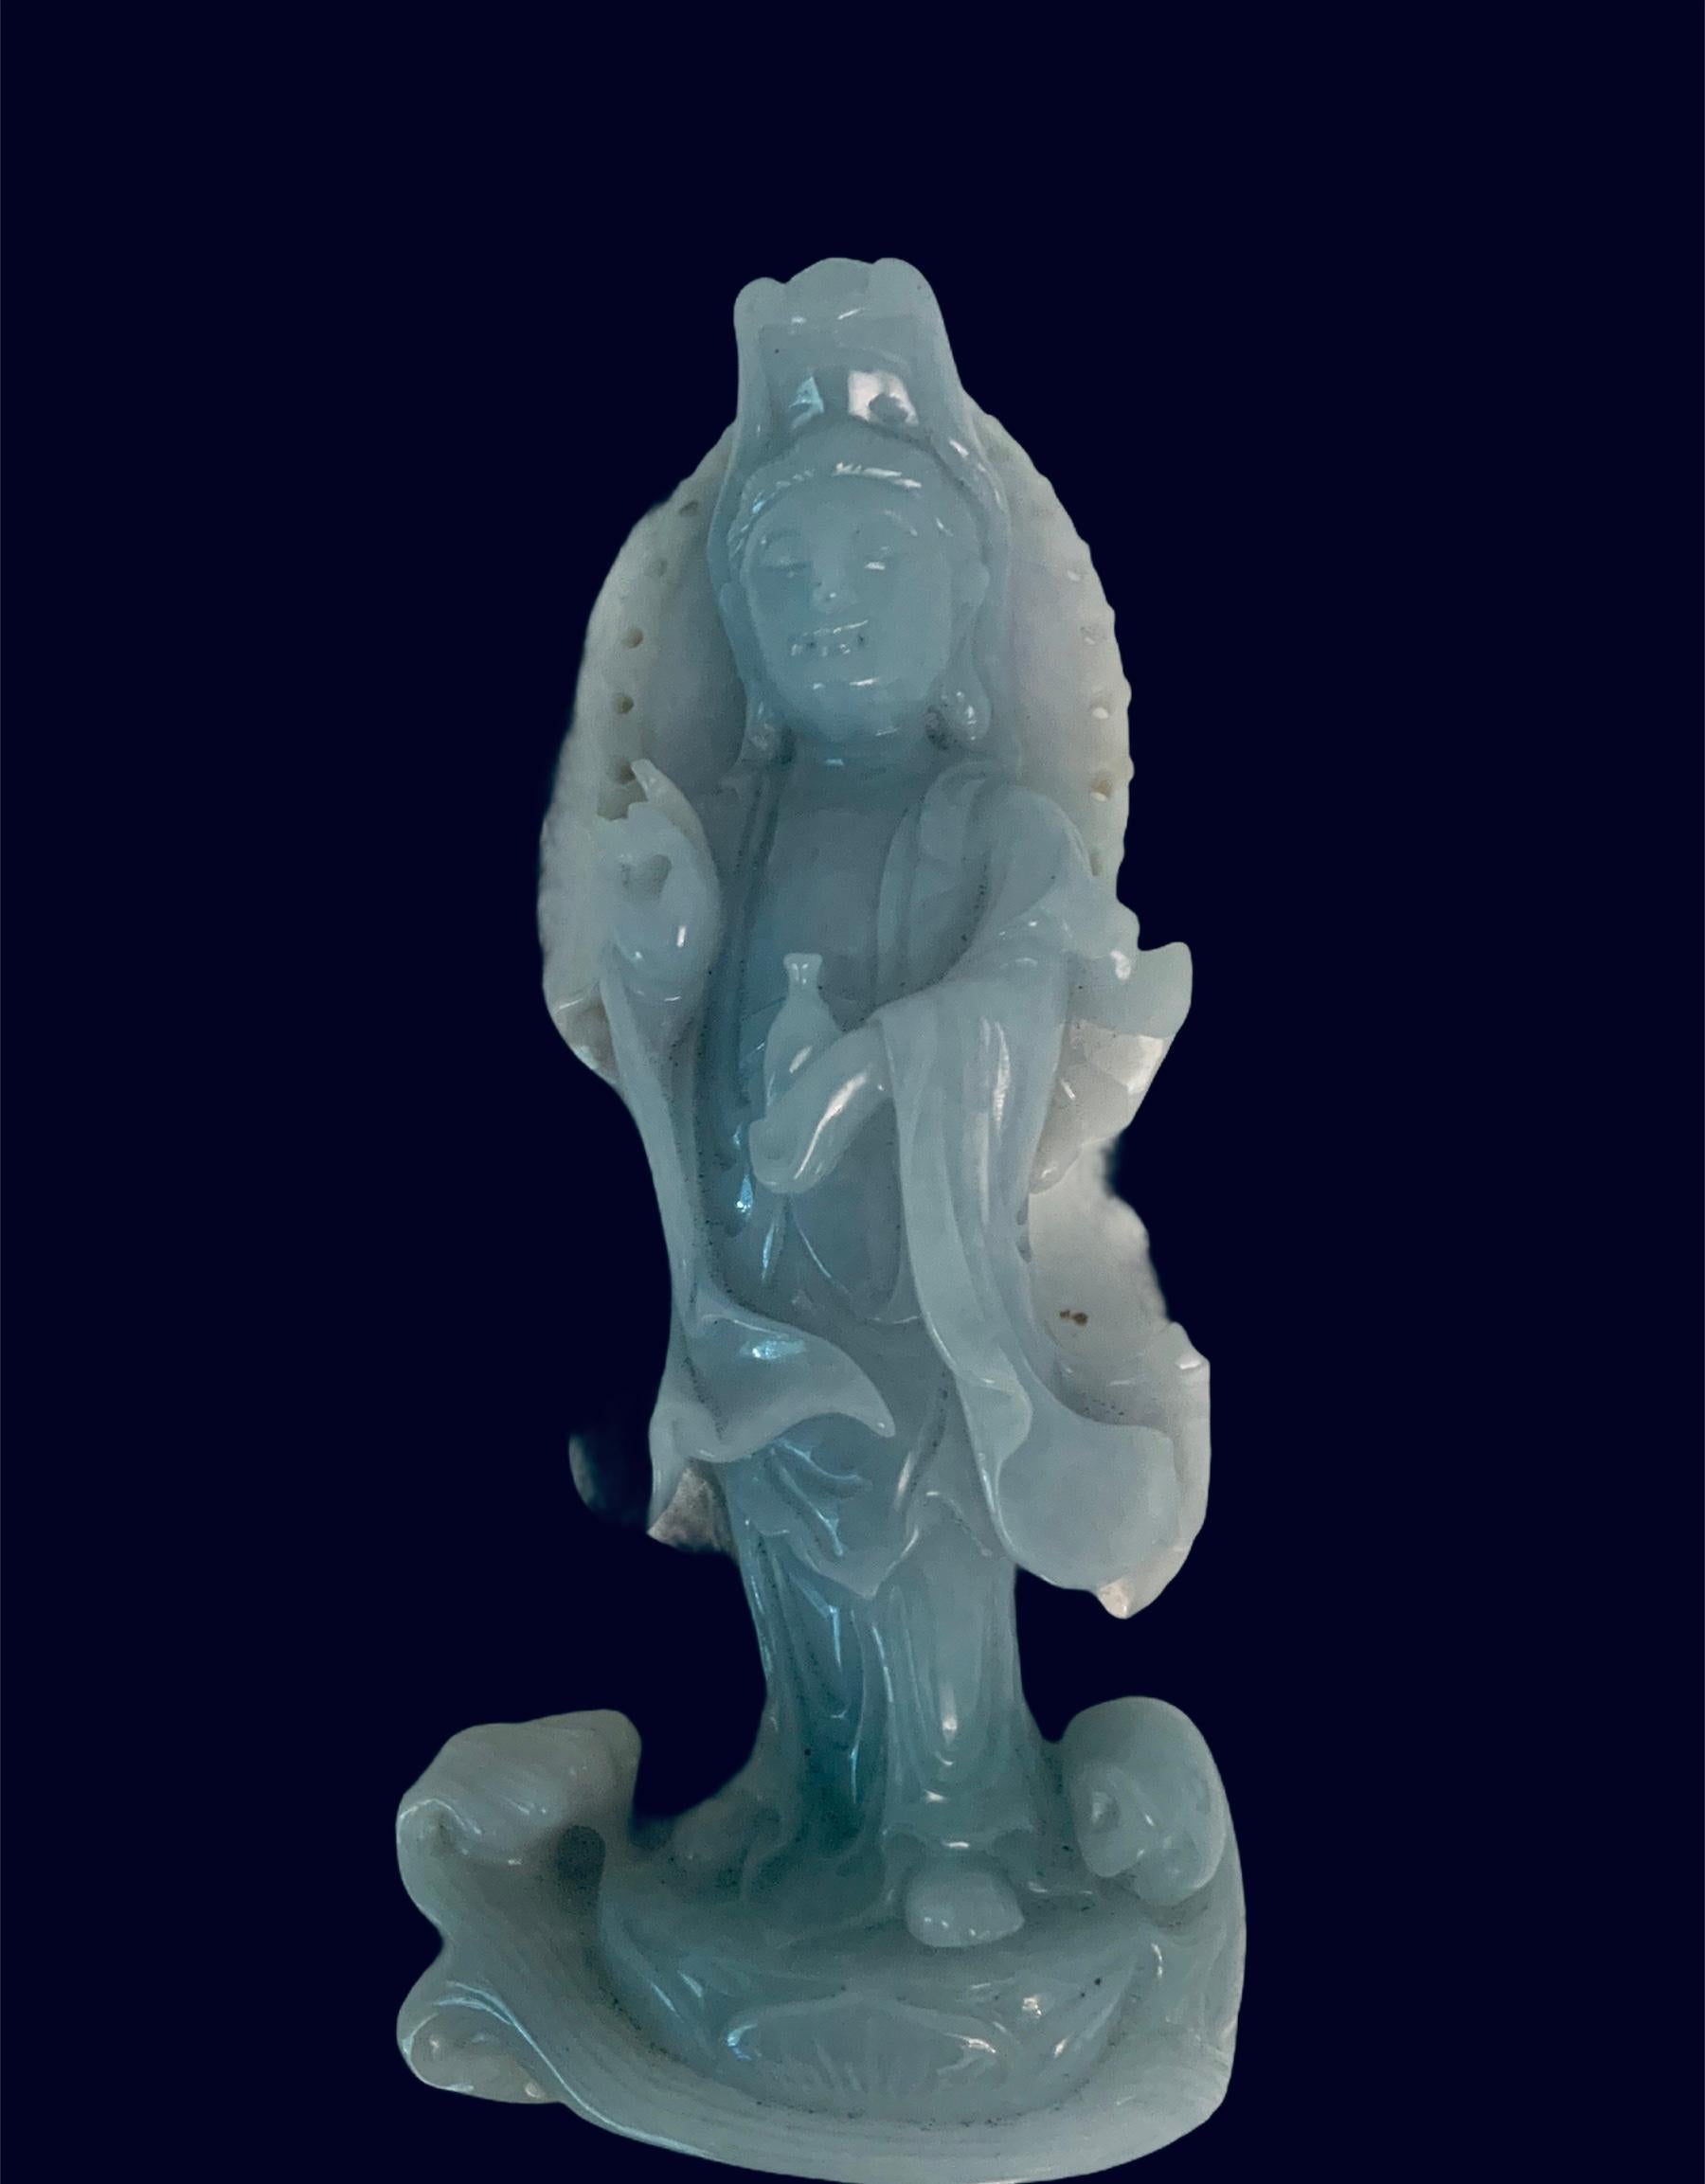 This is a small carved lavender “opaline” jade Guan Yin sculpture. The sculpture has some russet jade spots in the upper back. The back of her head is adorned with a reticulated mandorla. She is dressed with a lively buoyant robes. She is holding a